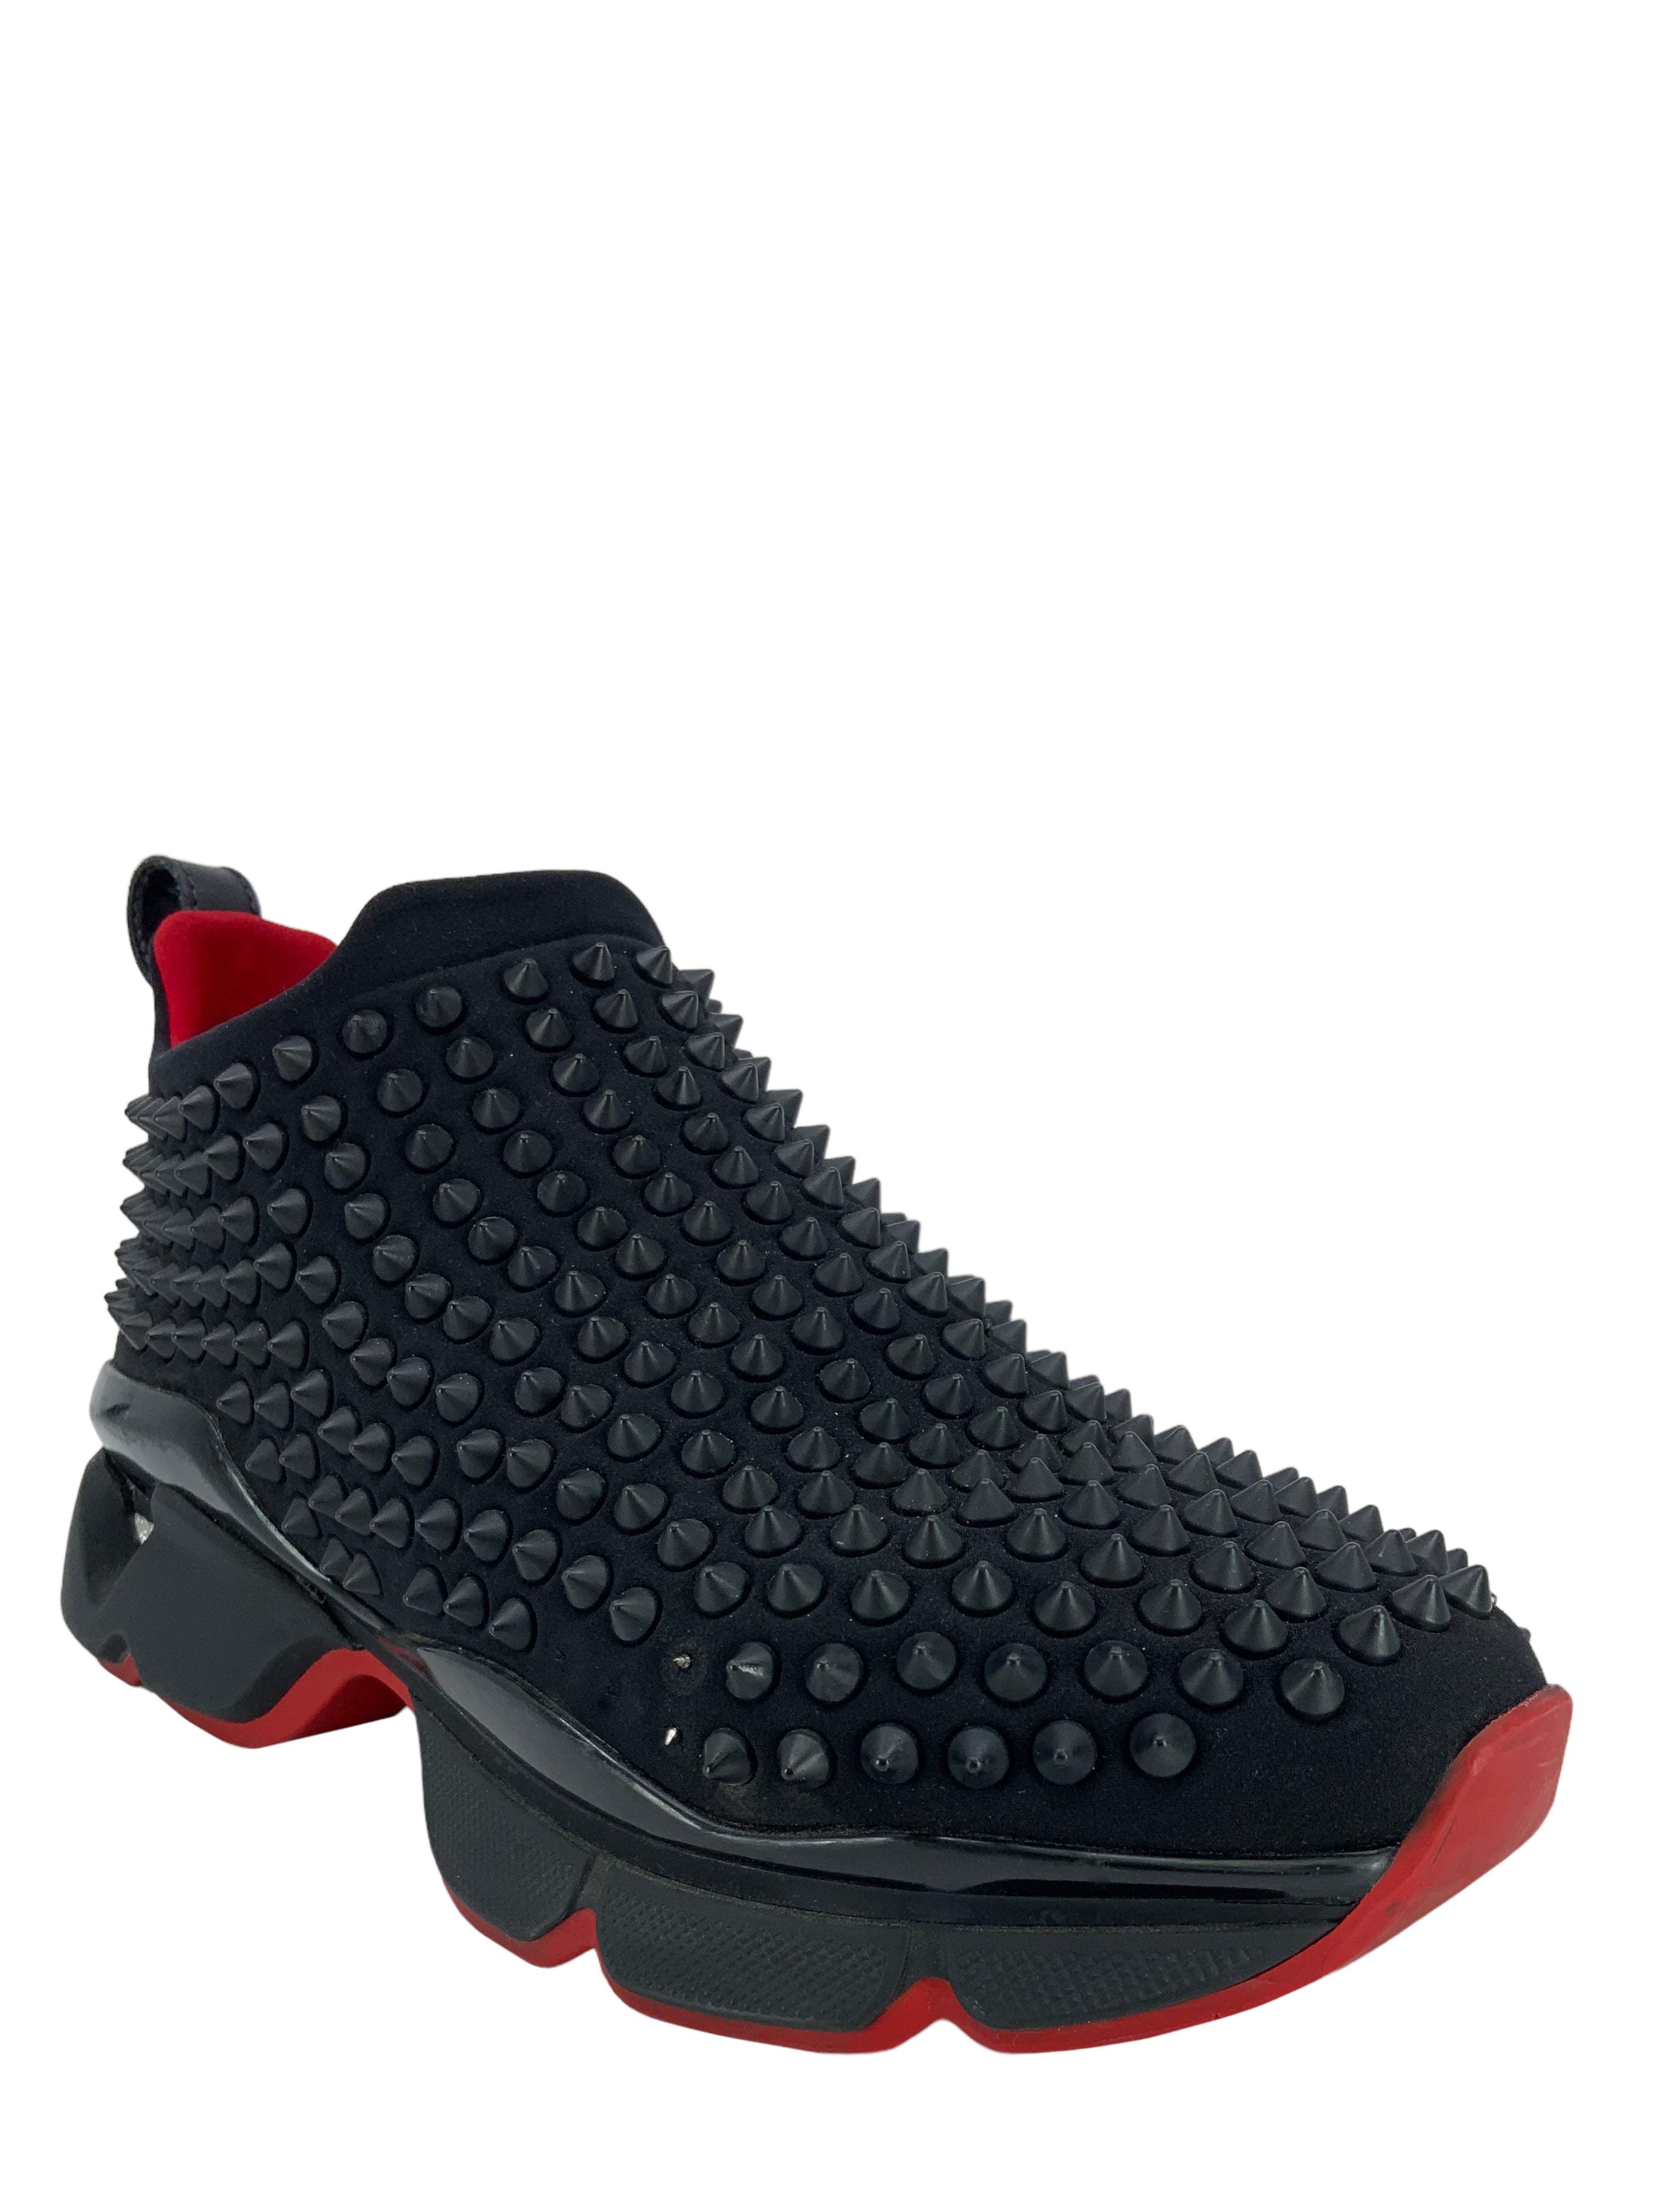 Christian Louboutin - Authenticated Spike Sock Trainer - Rubber Silver Plain for Women, Very Good Condition